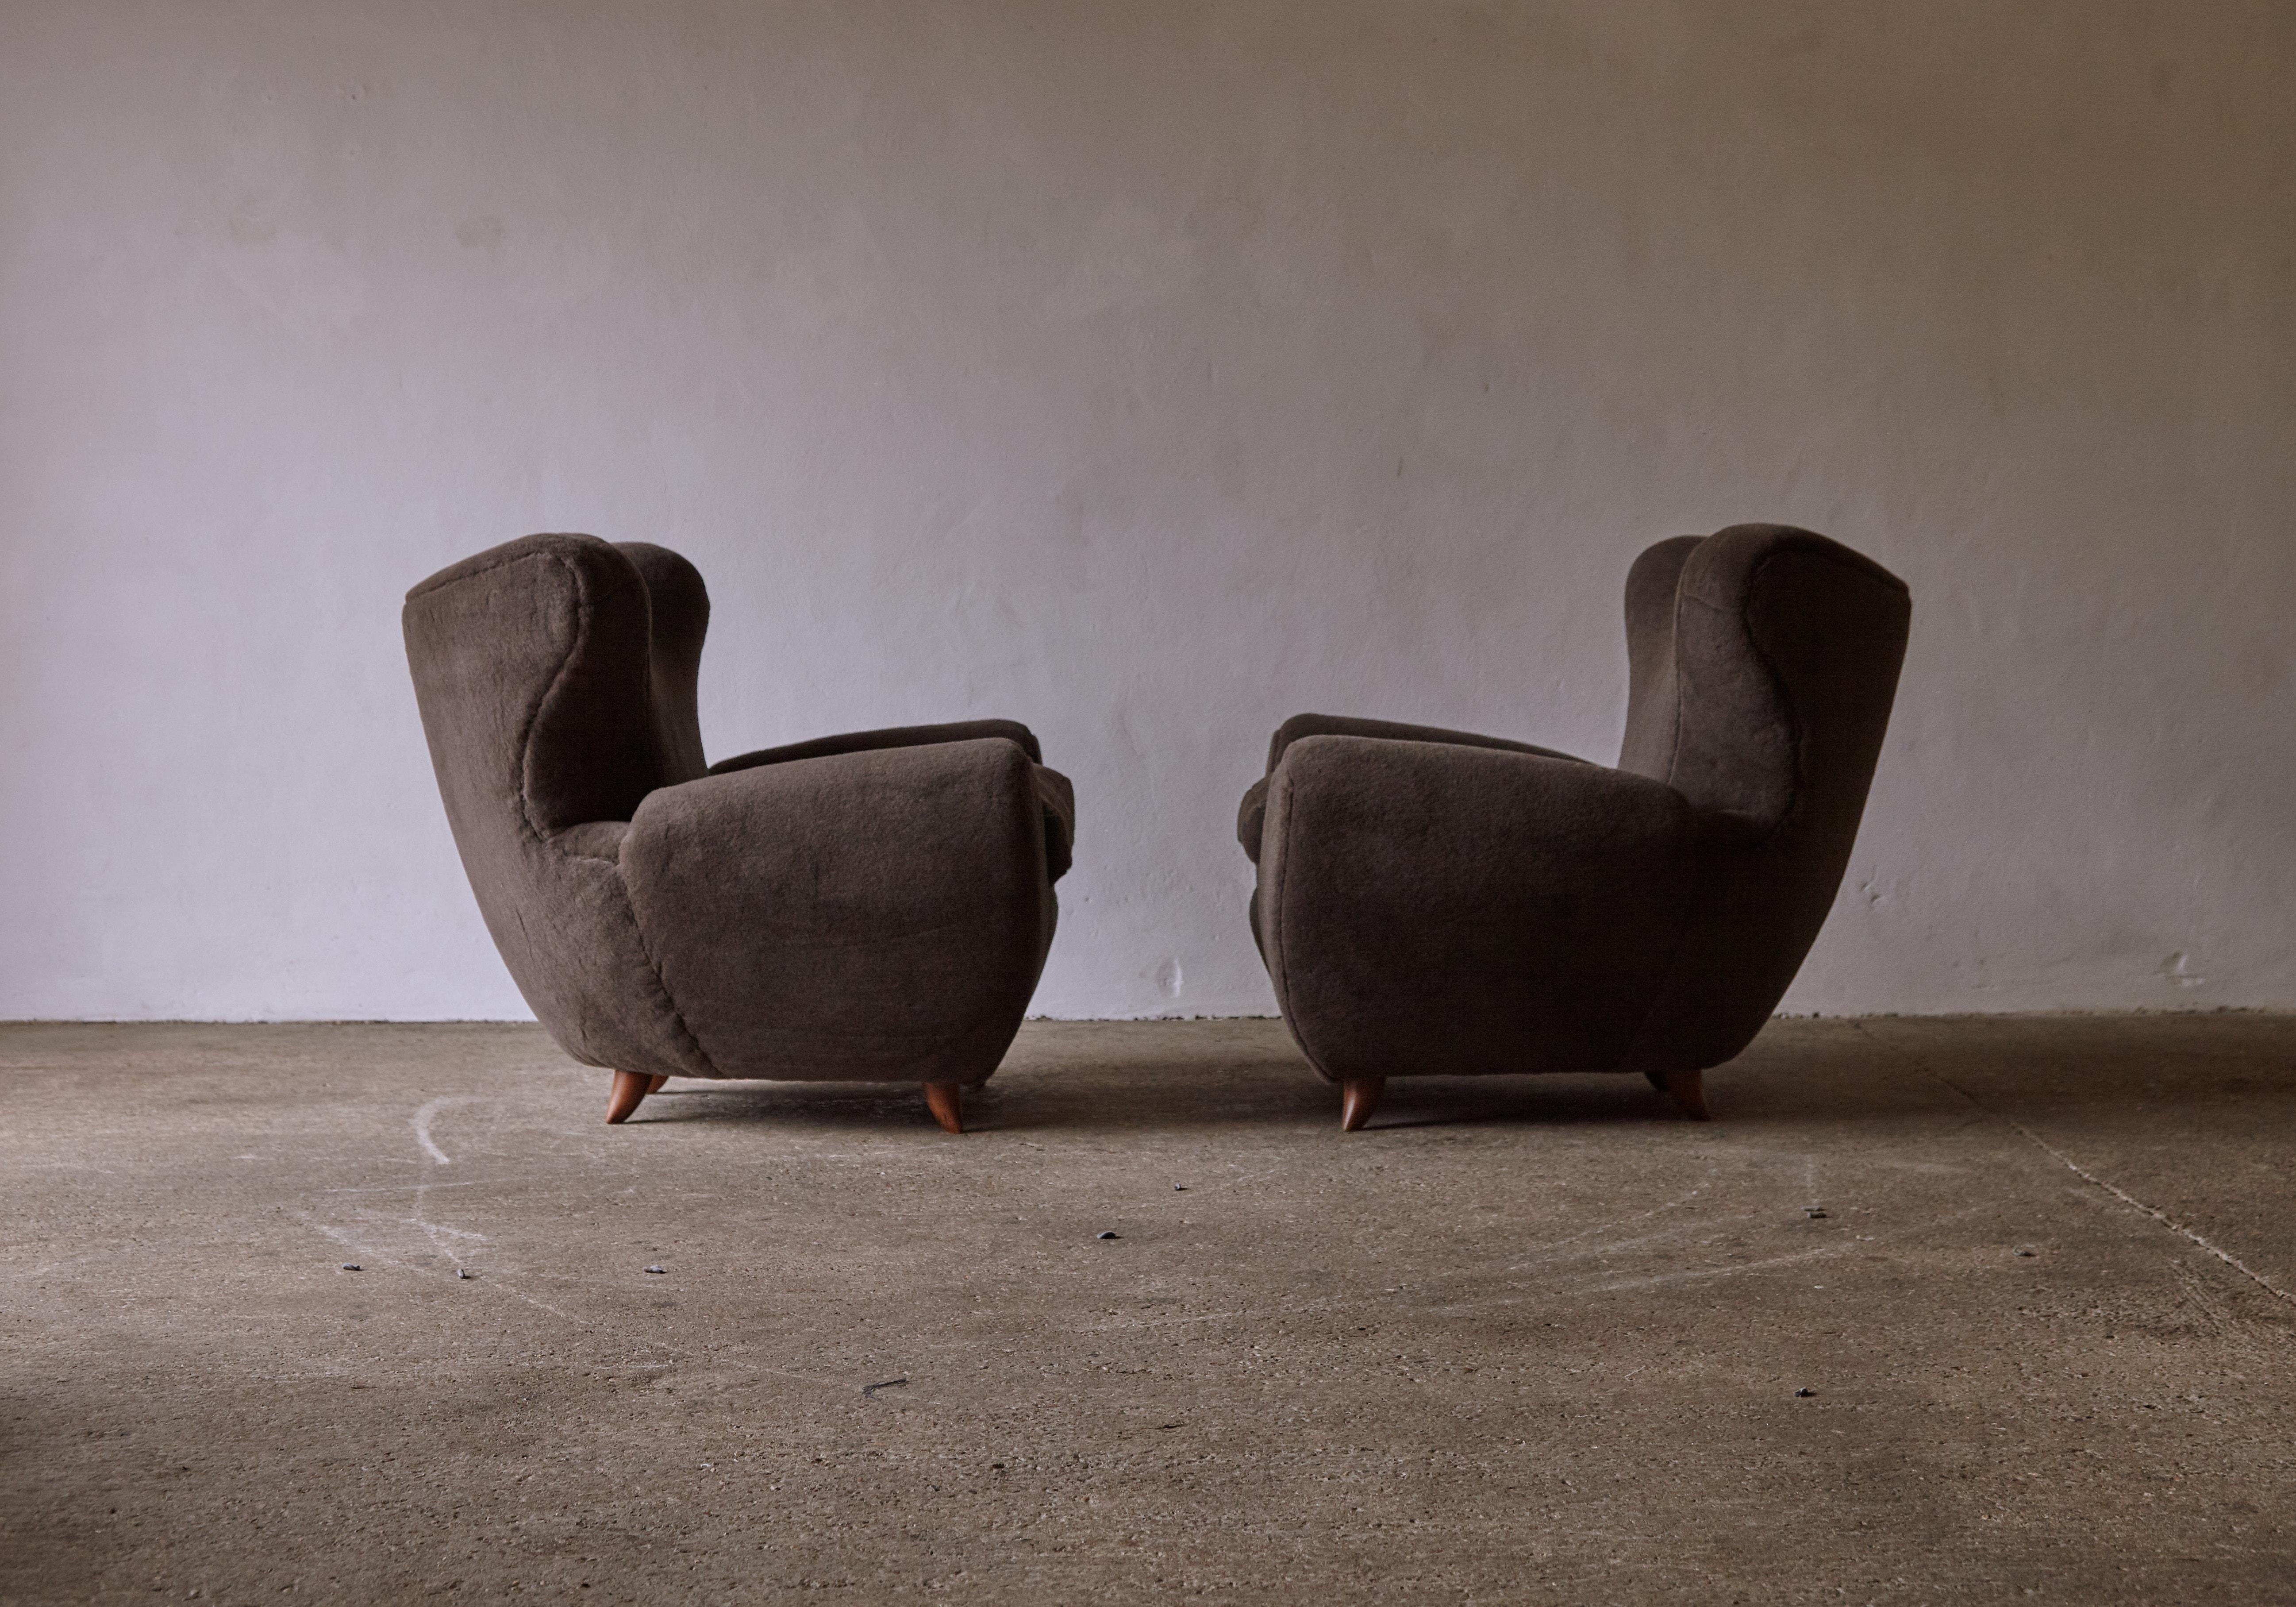 Exceptional Lounge Chairs, Upholstered in Alpaca, Italy, 1950s For Sale 2